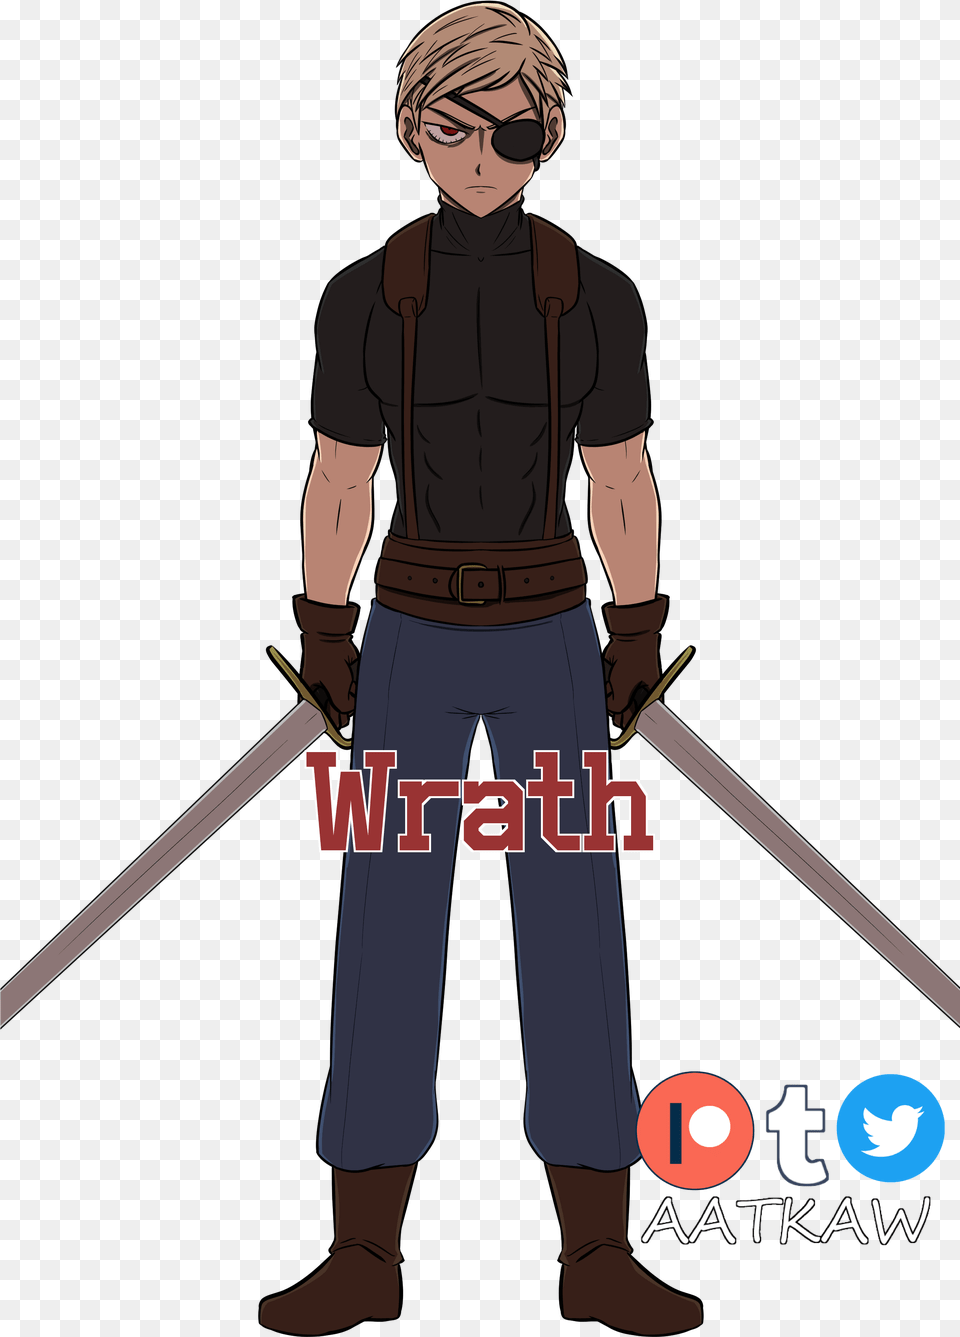 Wrath Bakugou By Aatkaw Fictional Character, Pants, Clothing, Adult, Person Png